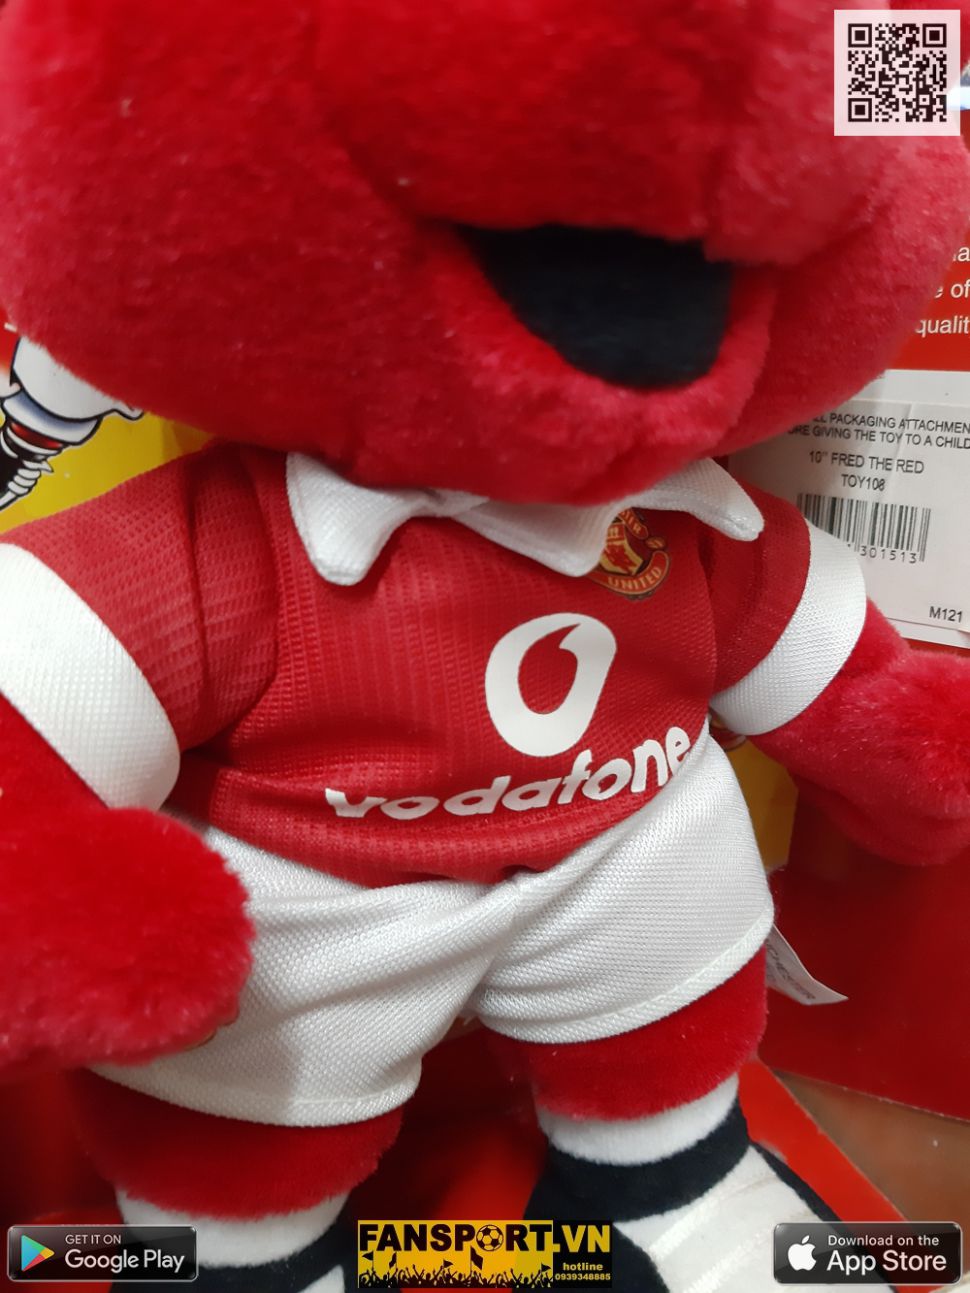 Fred the Red mastcos Manchester United red Vodafone new box 25cm